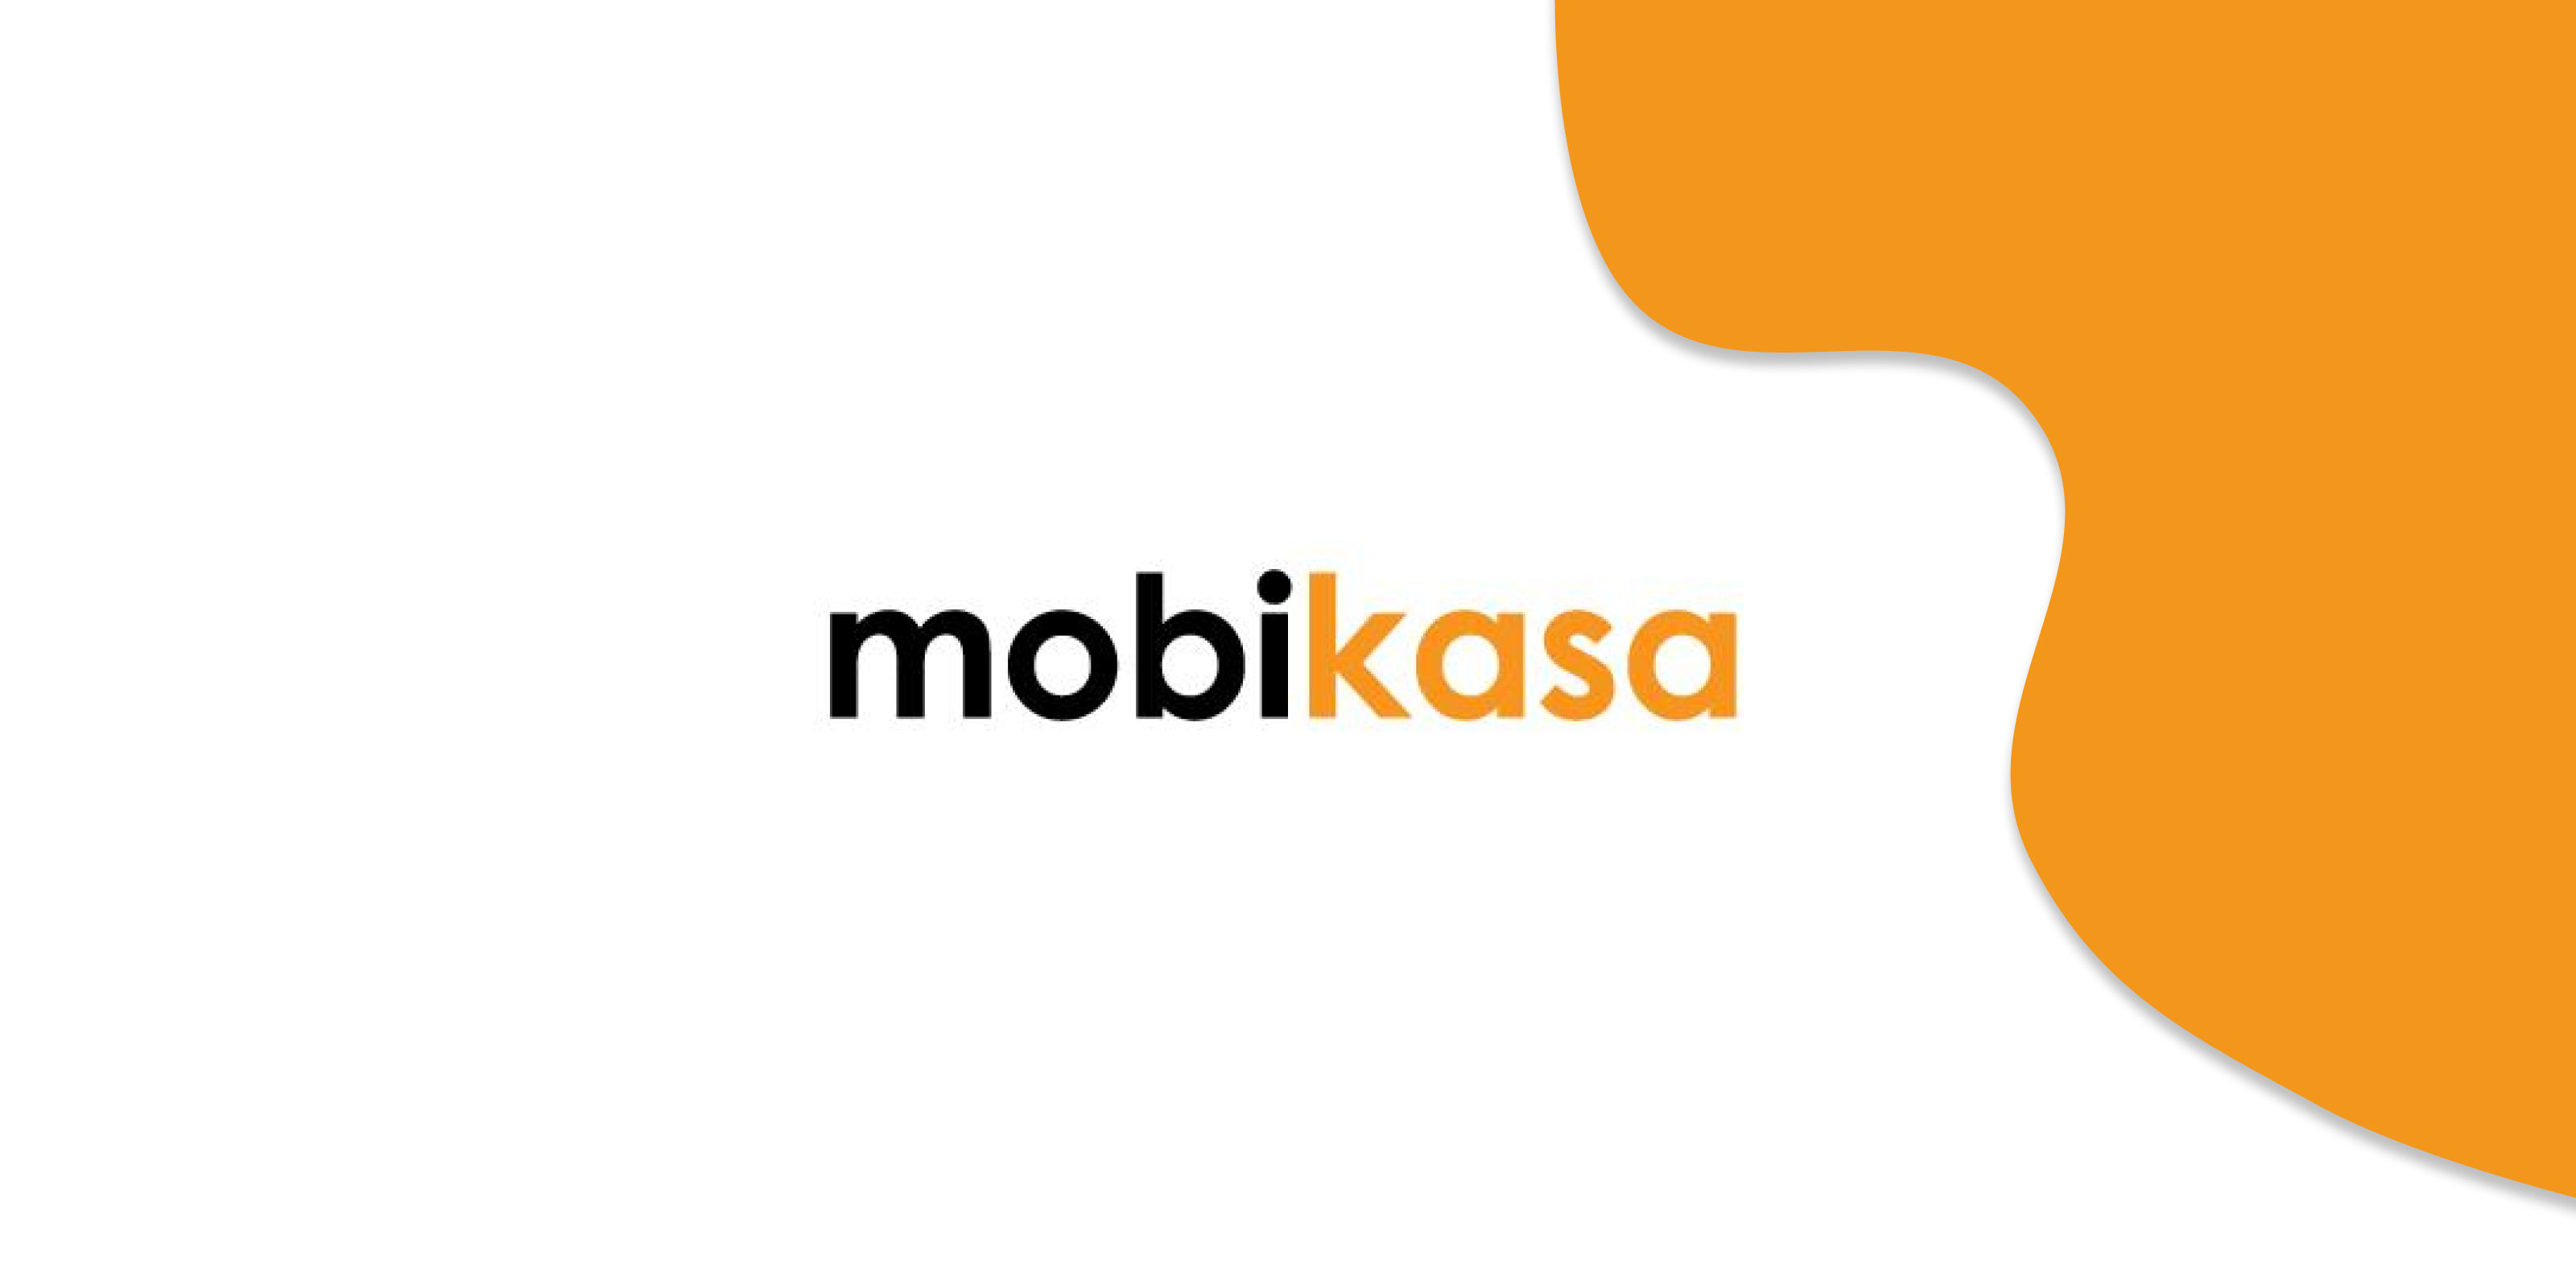 logo image for mobikasa for a blog on listing companies for node js services in india